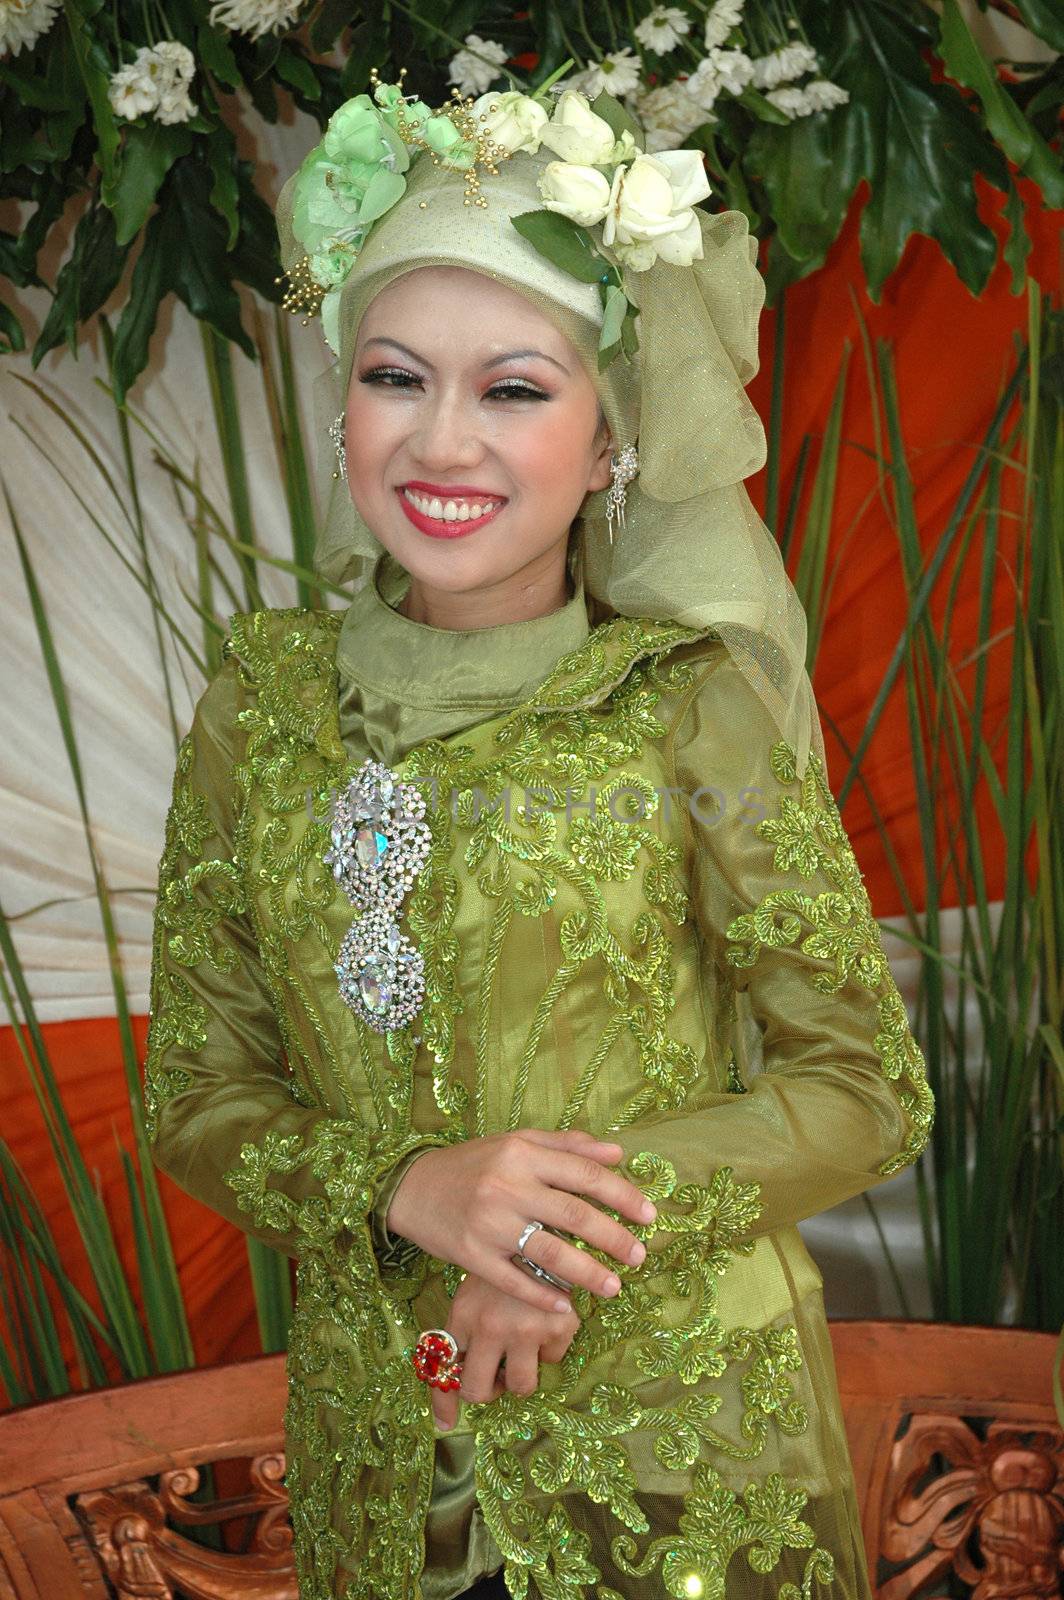 bride wearing traditional costume from west java-indonesia